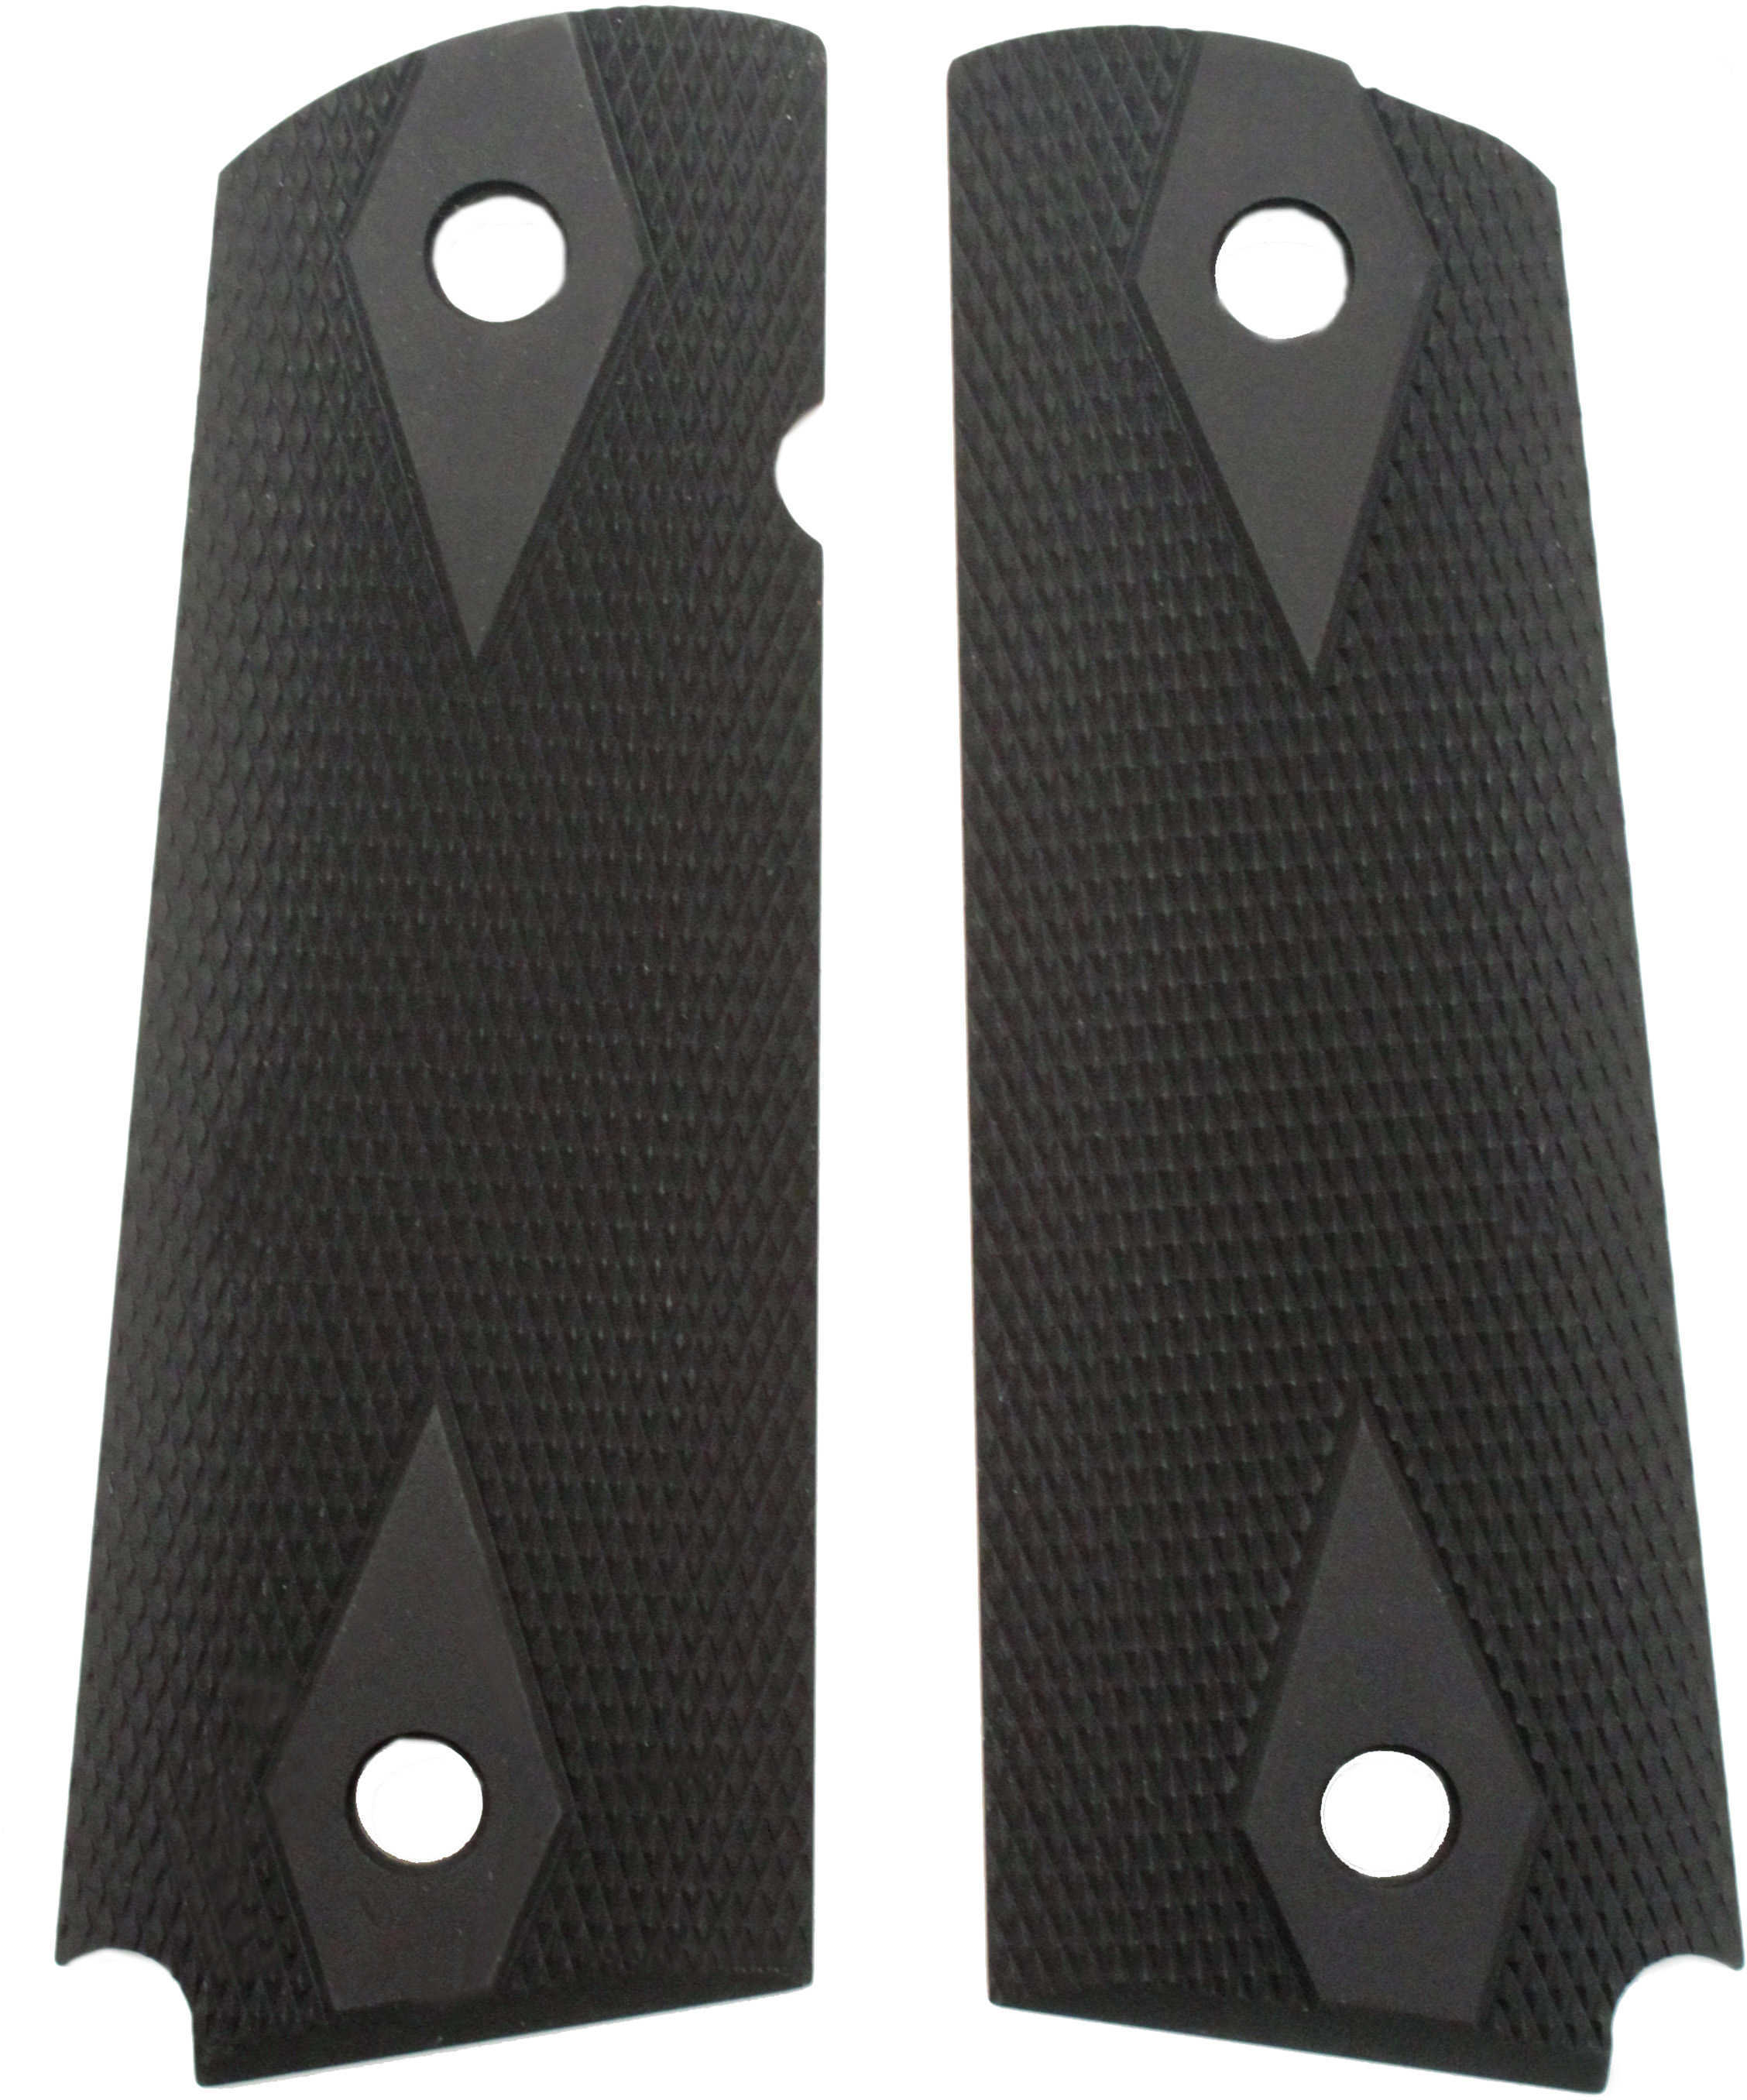 Hogue 1911 Government/Commander 3/16" Thin Grips Aluminum Checkered Matte Black Anodized 01470